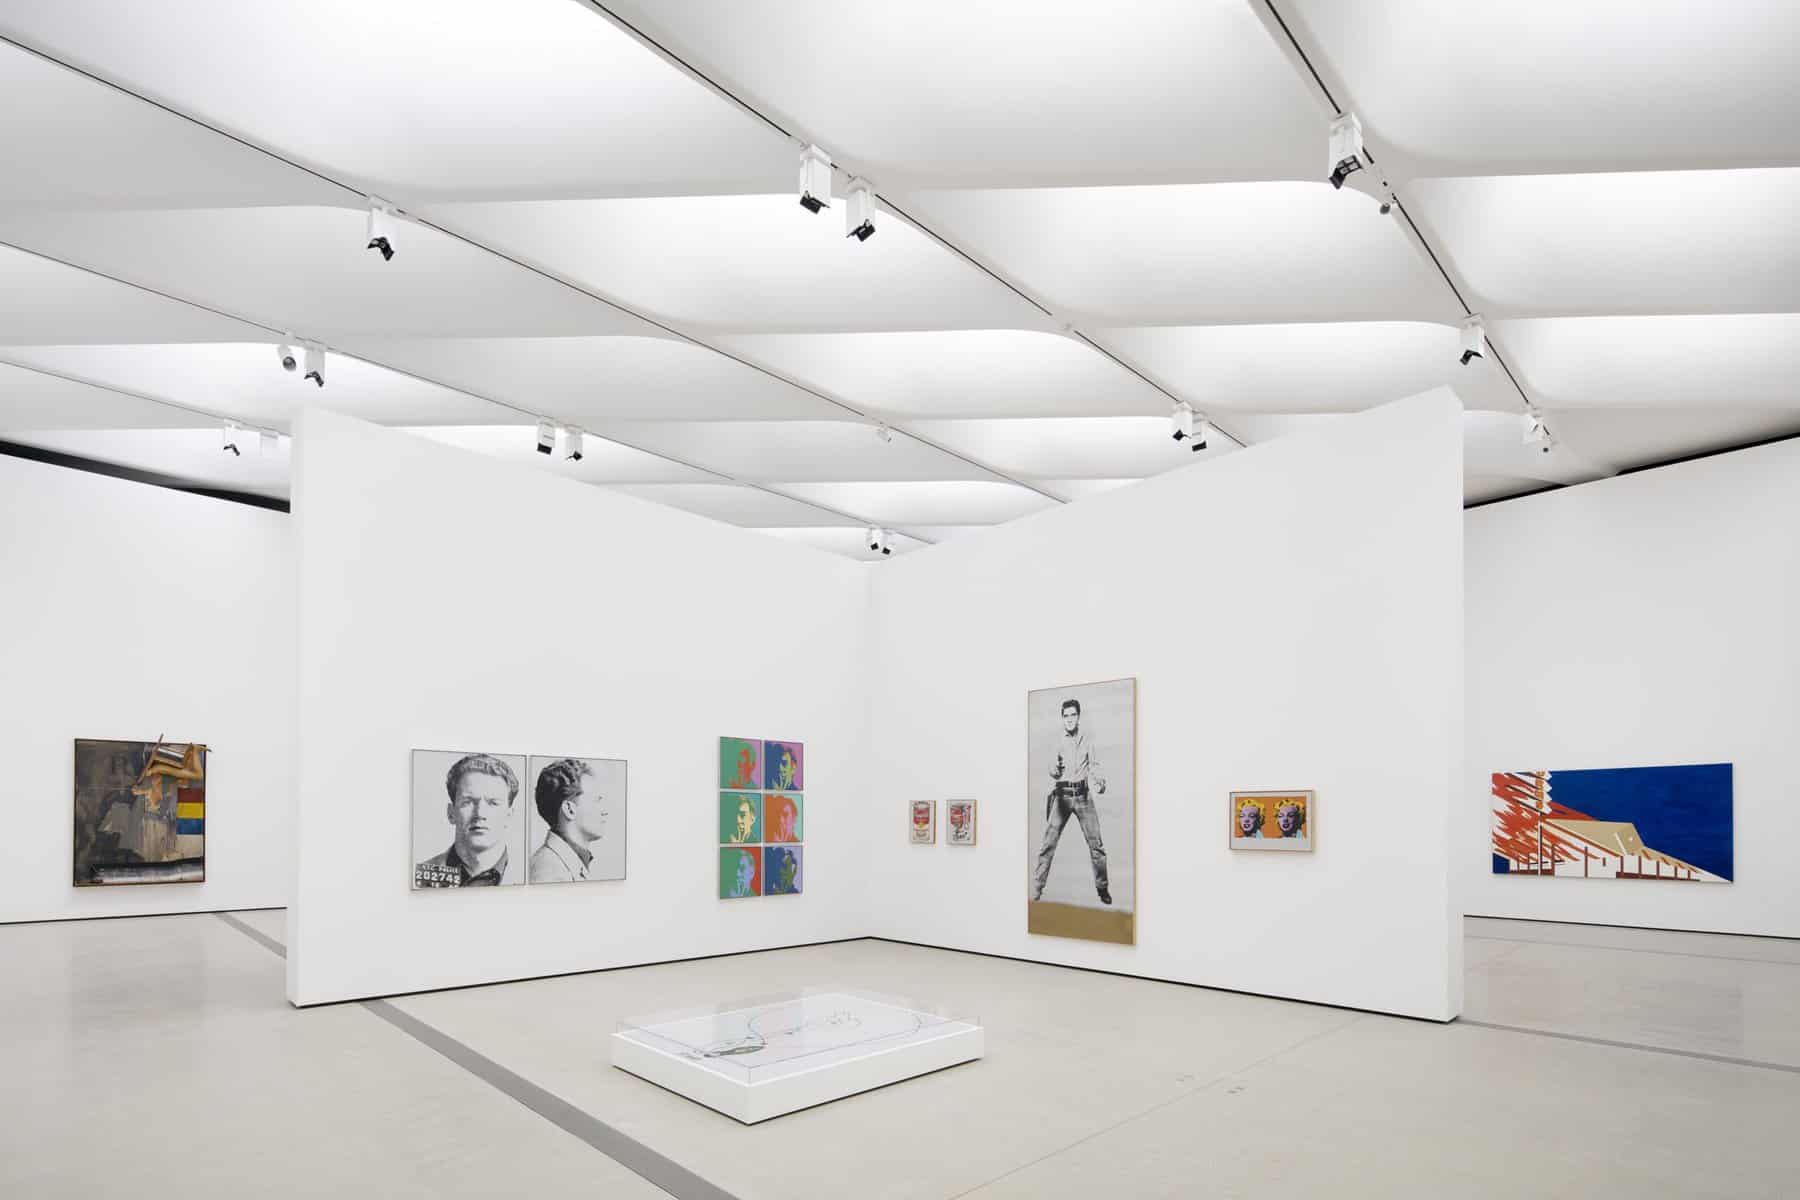 The Broad Art Collection